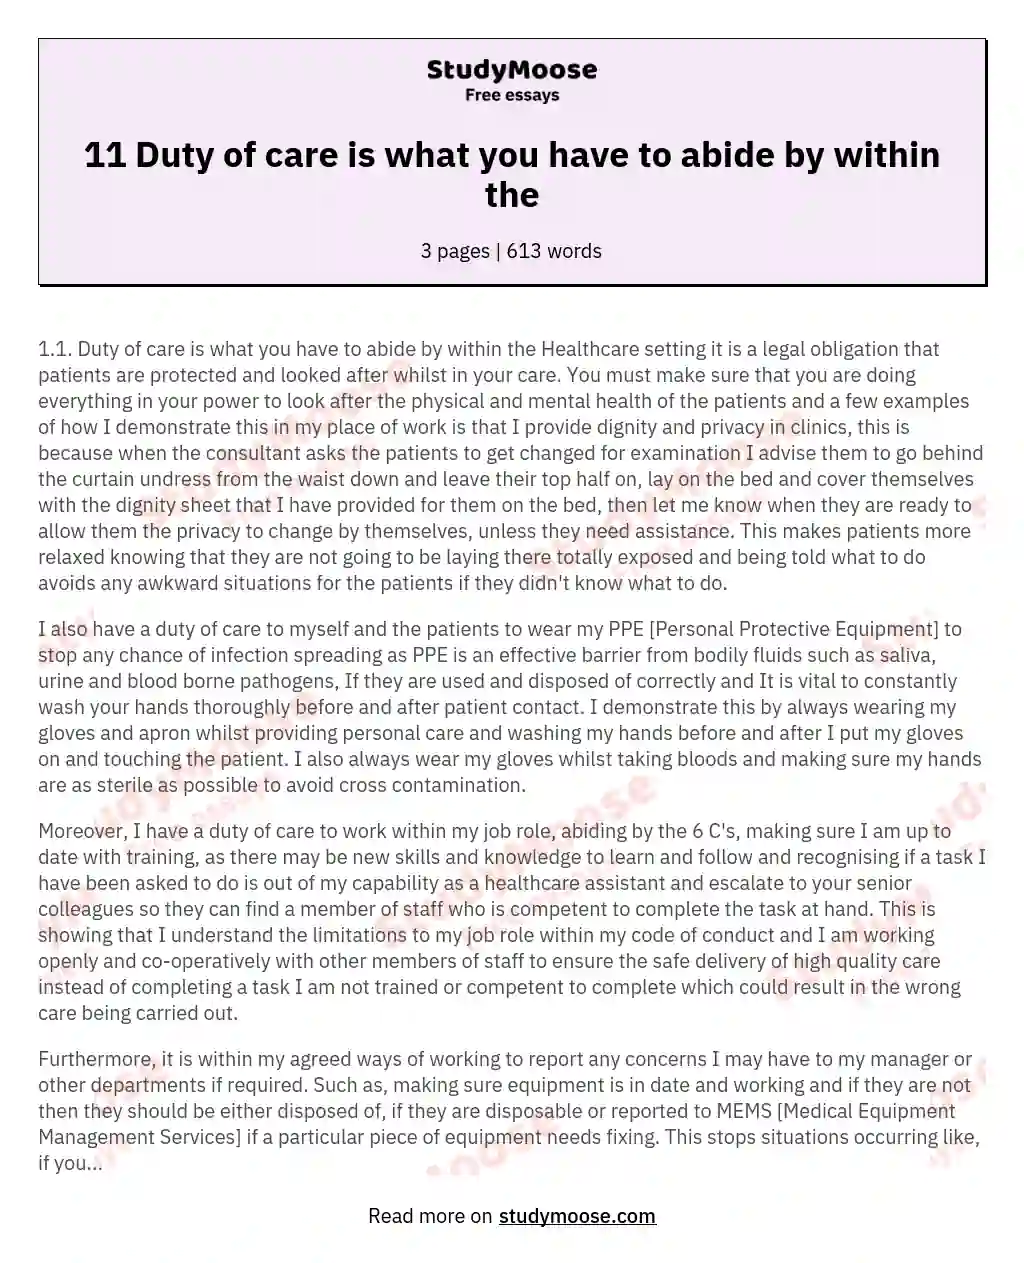 11 Duty of care is what you have to abide by within the